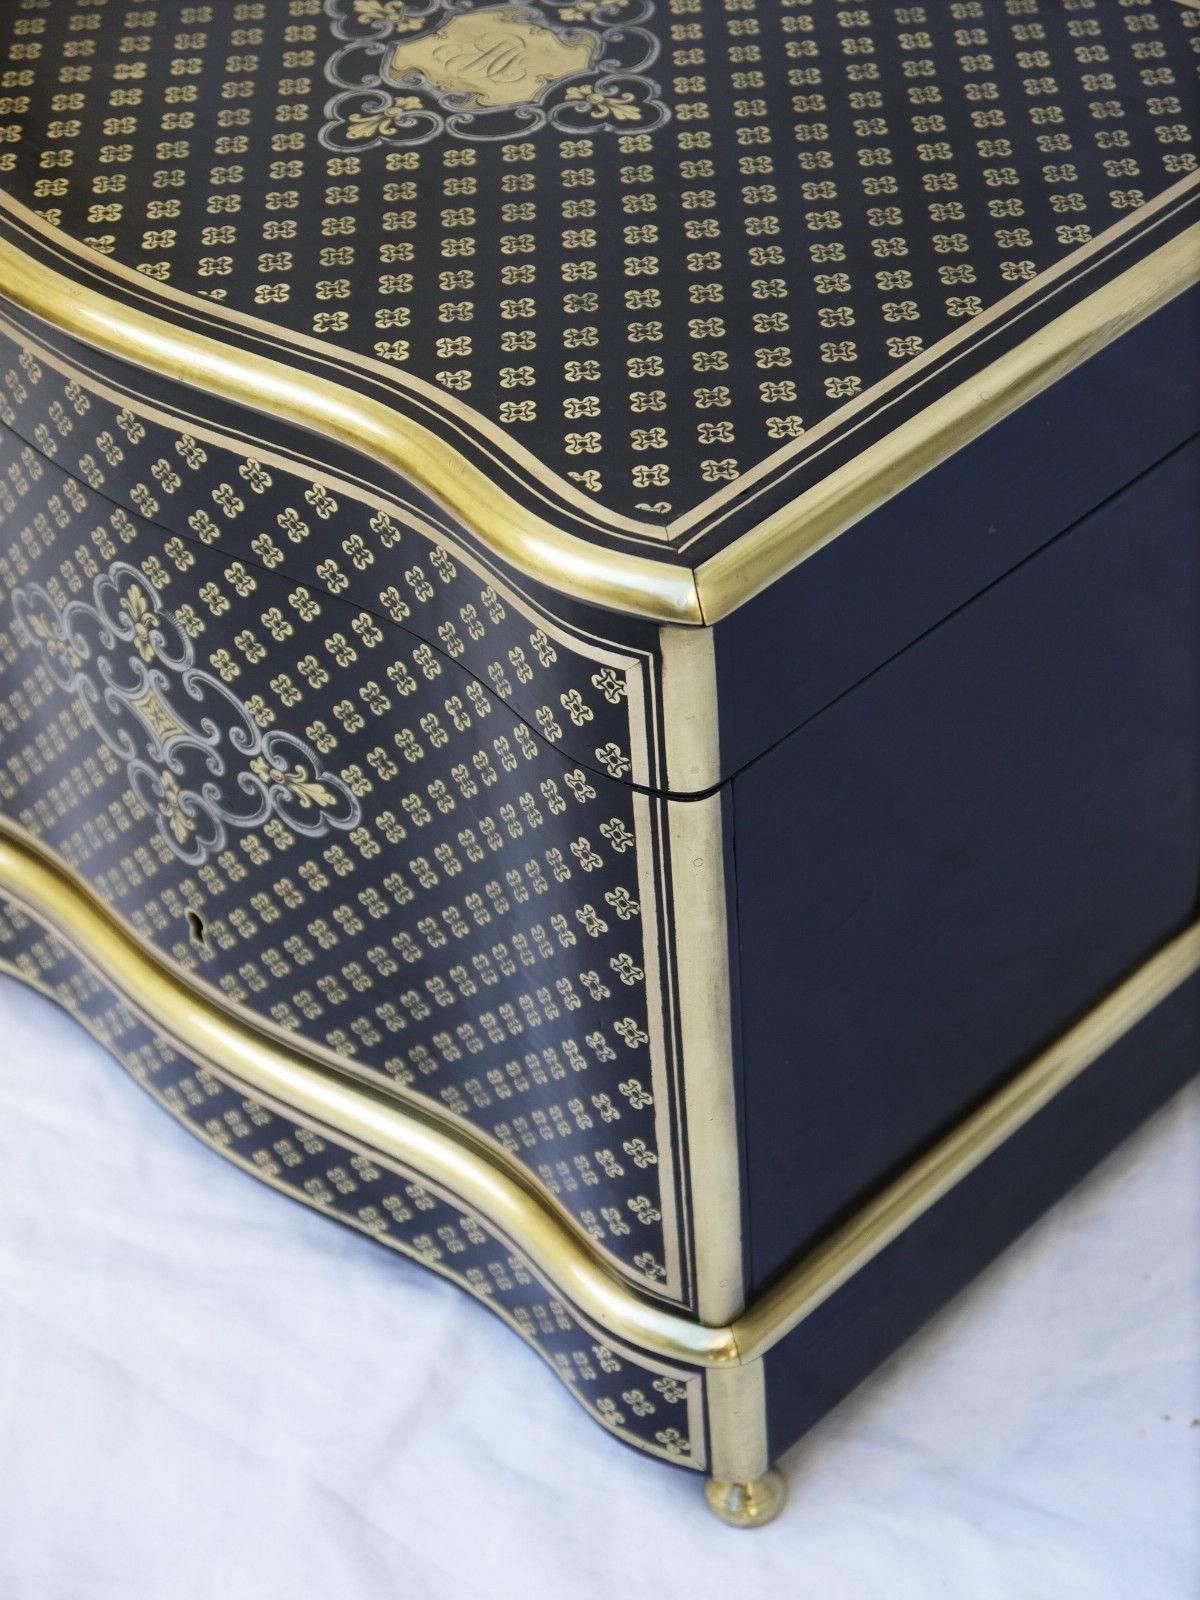 A fine antique French 19th splendid ebony plated liquor cellar box with Boulle style marquetry. Queen brass flower engraved on the lid and façade.
The cartridges are surrounded by a thin tin inlay. Polished bronze on ridges accentuating the